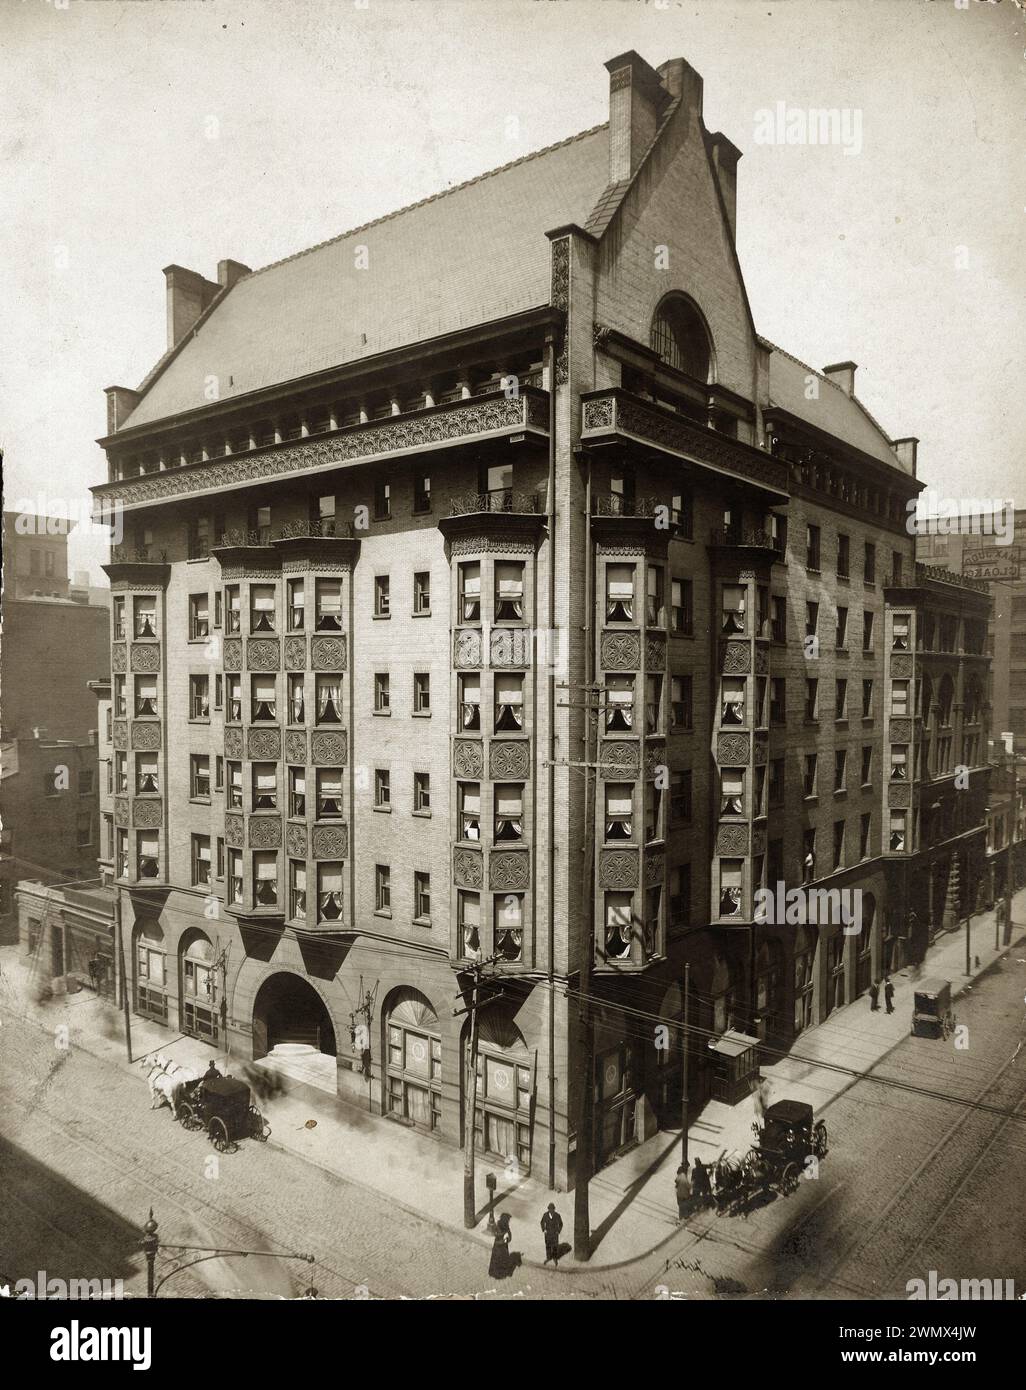 St. Nicholas Hotel, 407 North Eighth Street. (Northwest corner of Eighth and Locust Streets. Also known as the Victoria Building). Photograph 1905. Stock Photo